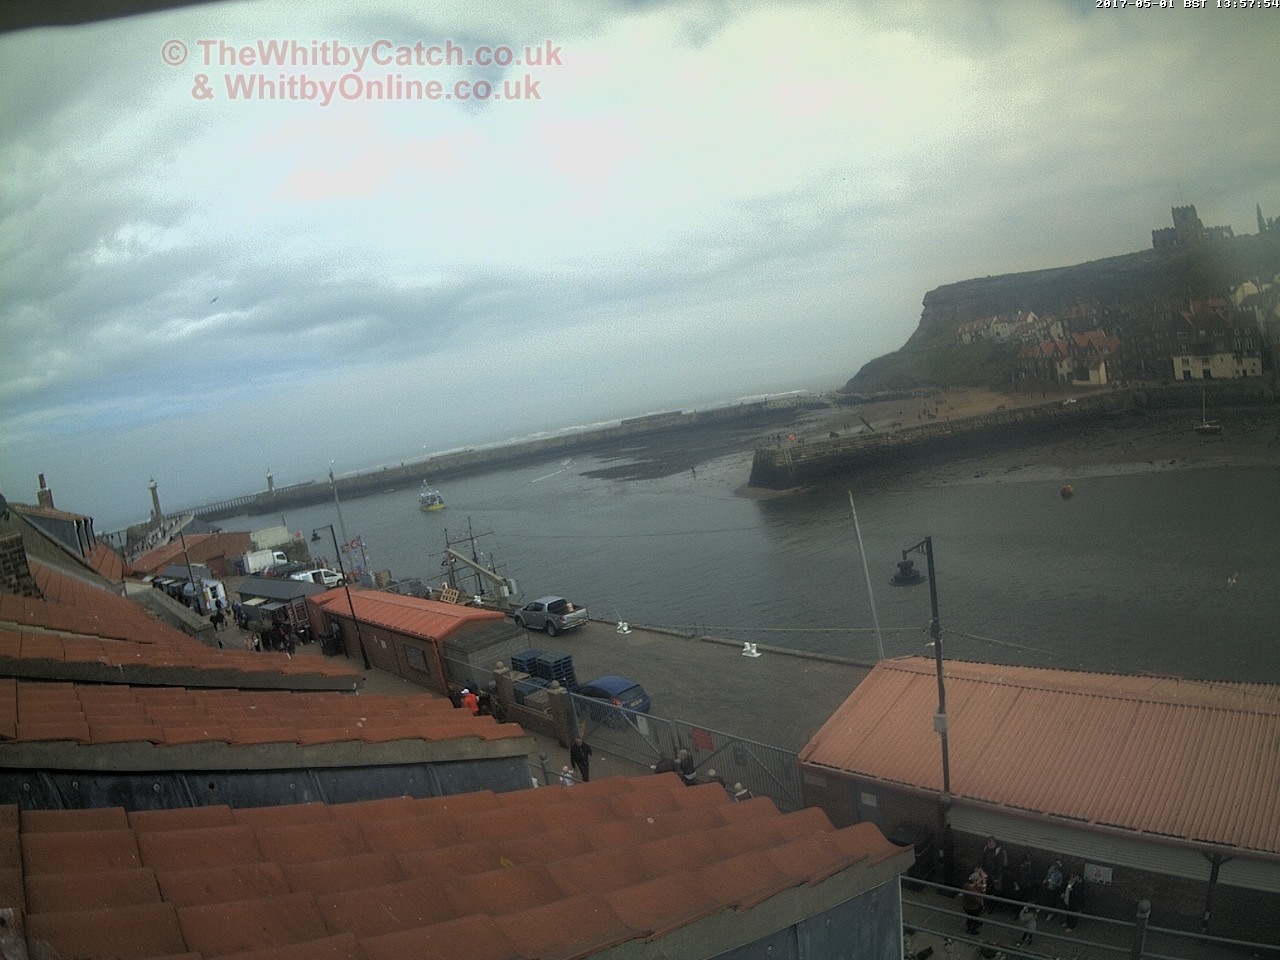 Whitby Mon 1st May 2017 13:58.